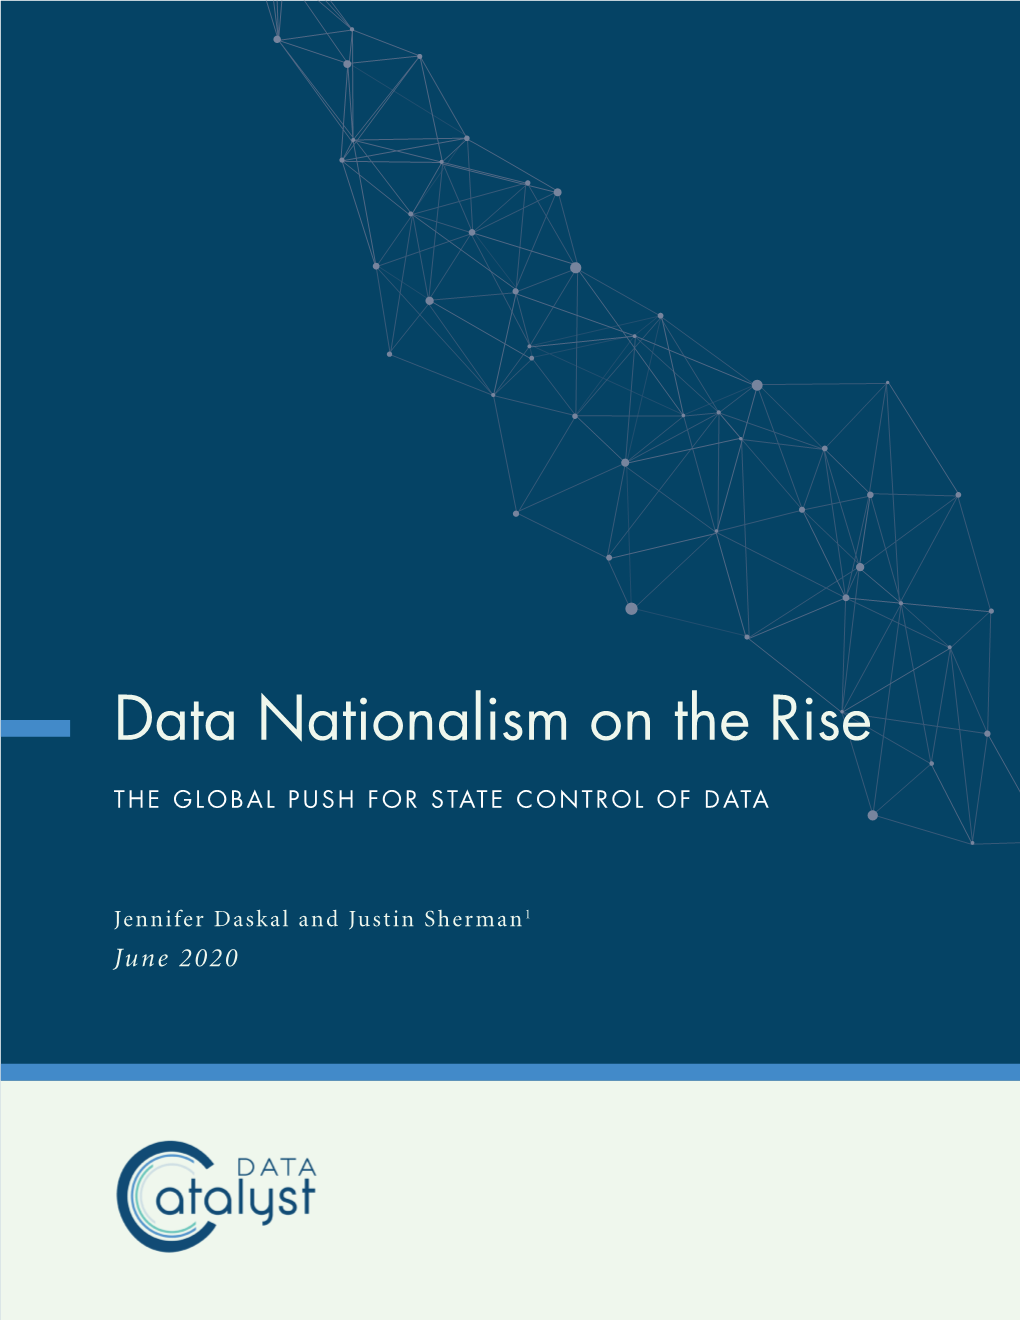 Data Nationalism on the Rise